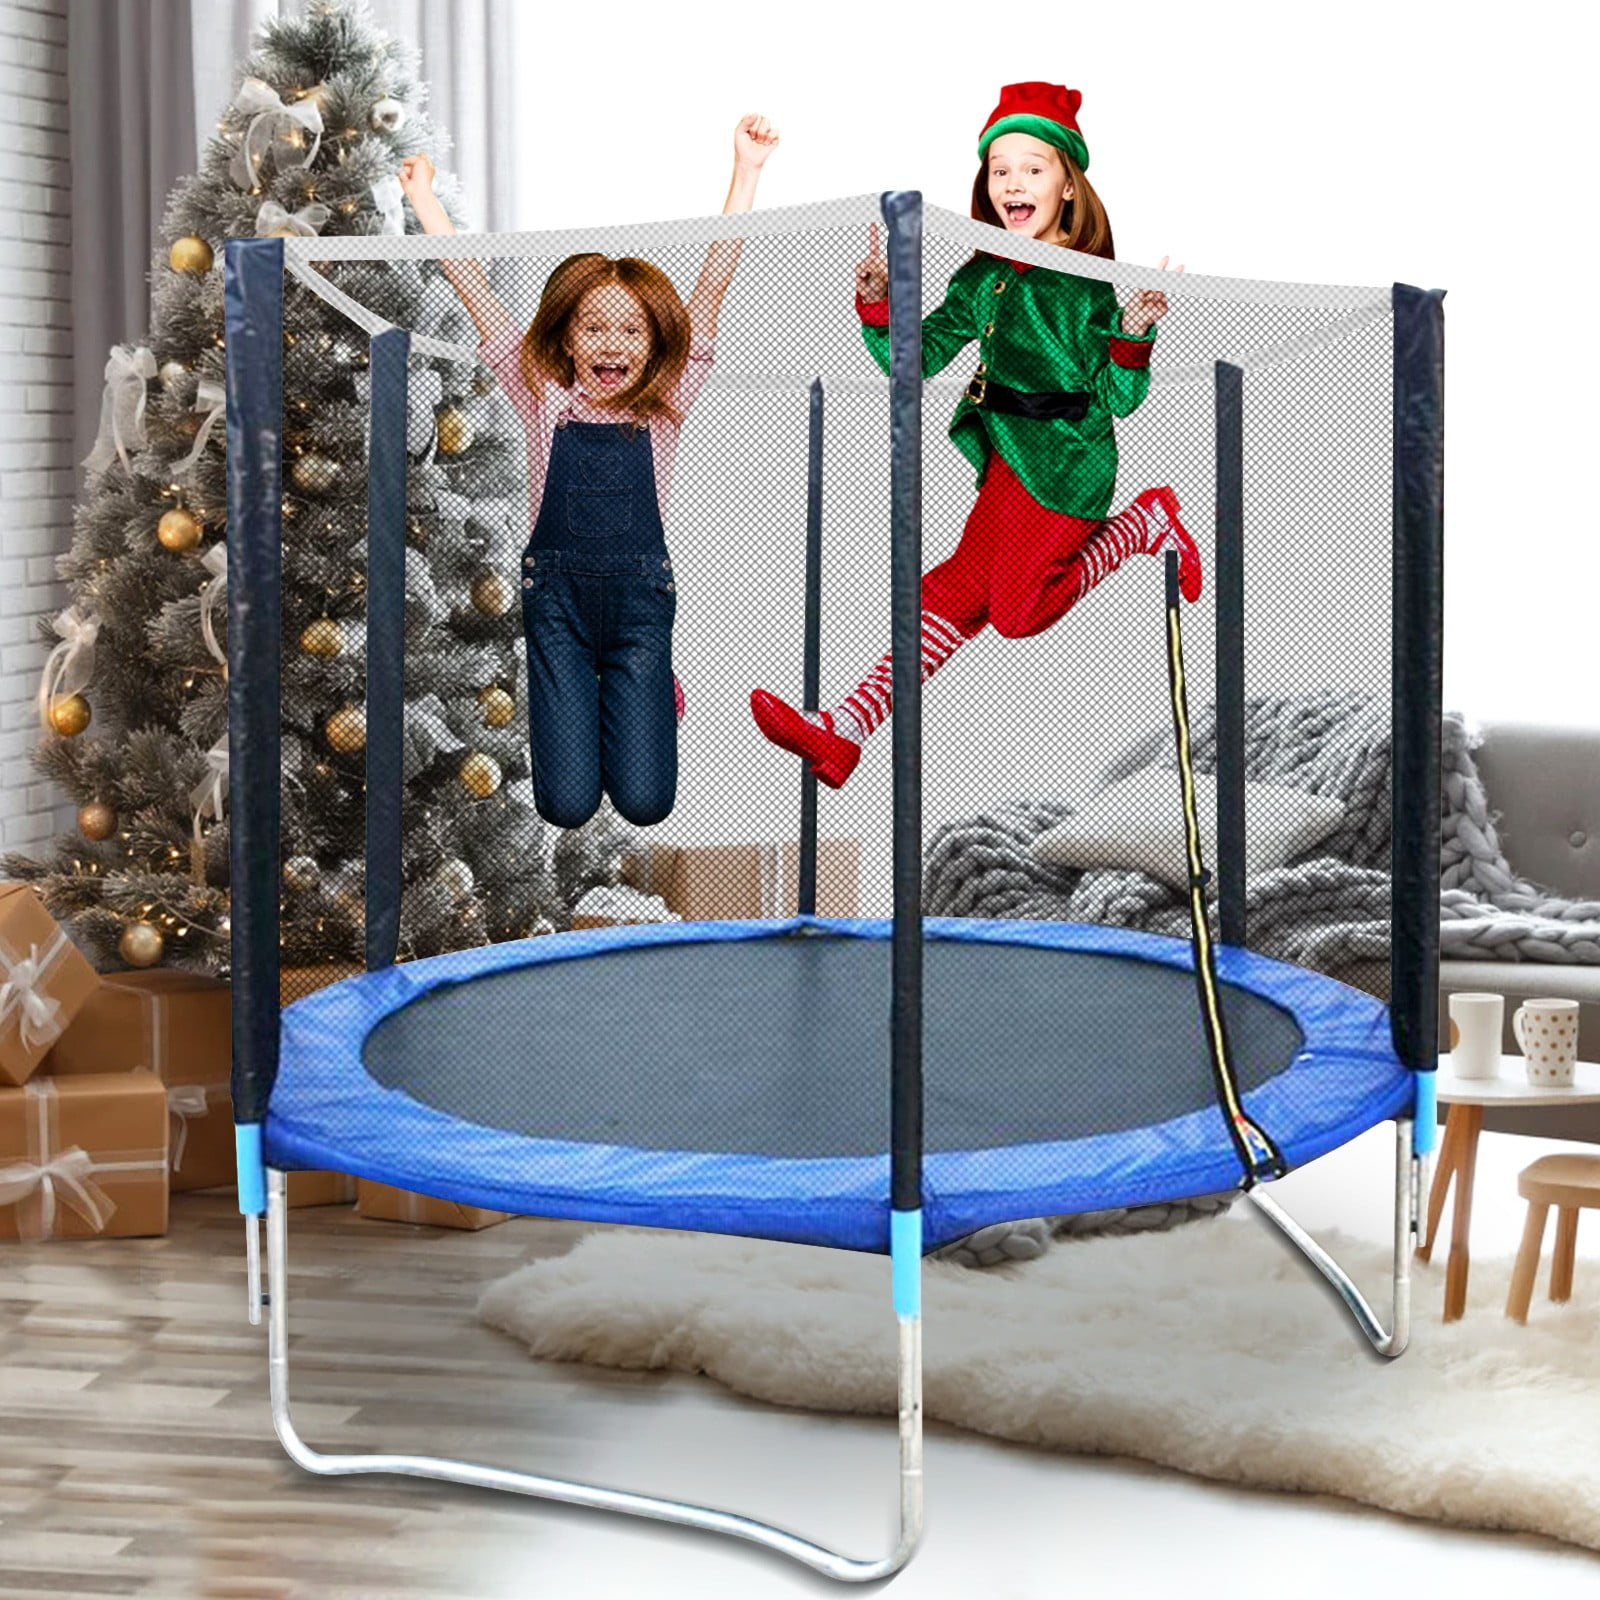 Details about   6FT8FT Kids Trampoline With Spring Cover Safety Net Jumping Pad Protection Guard